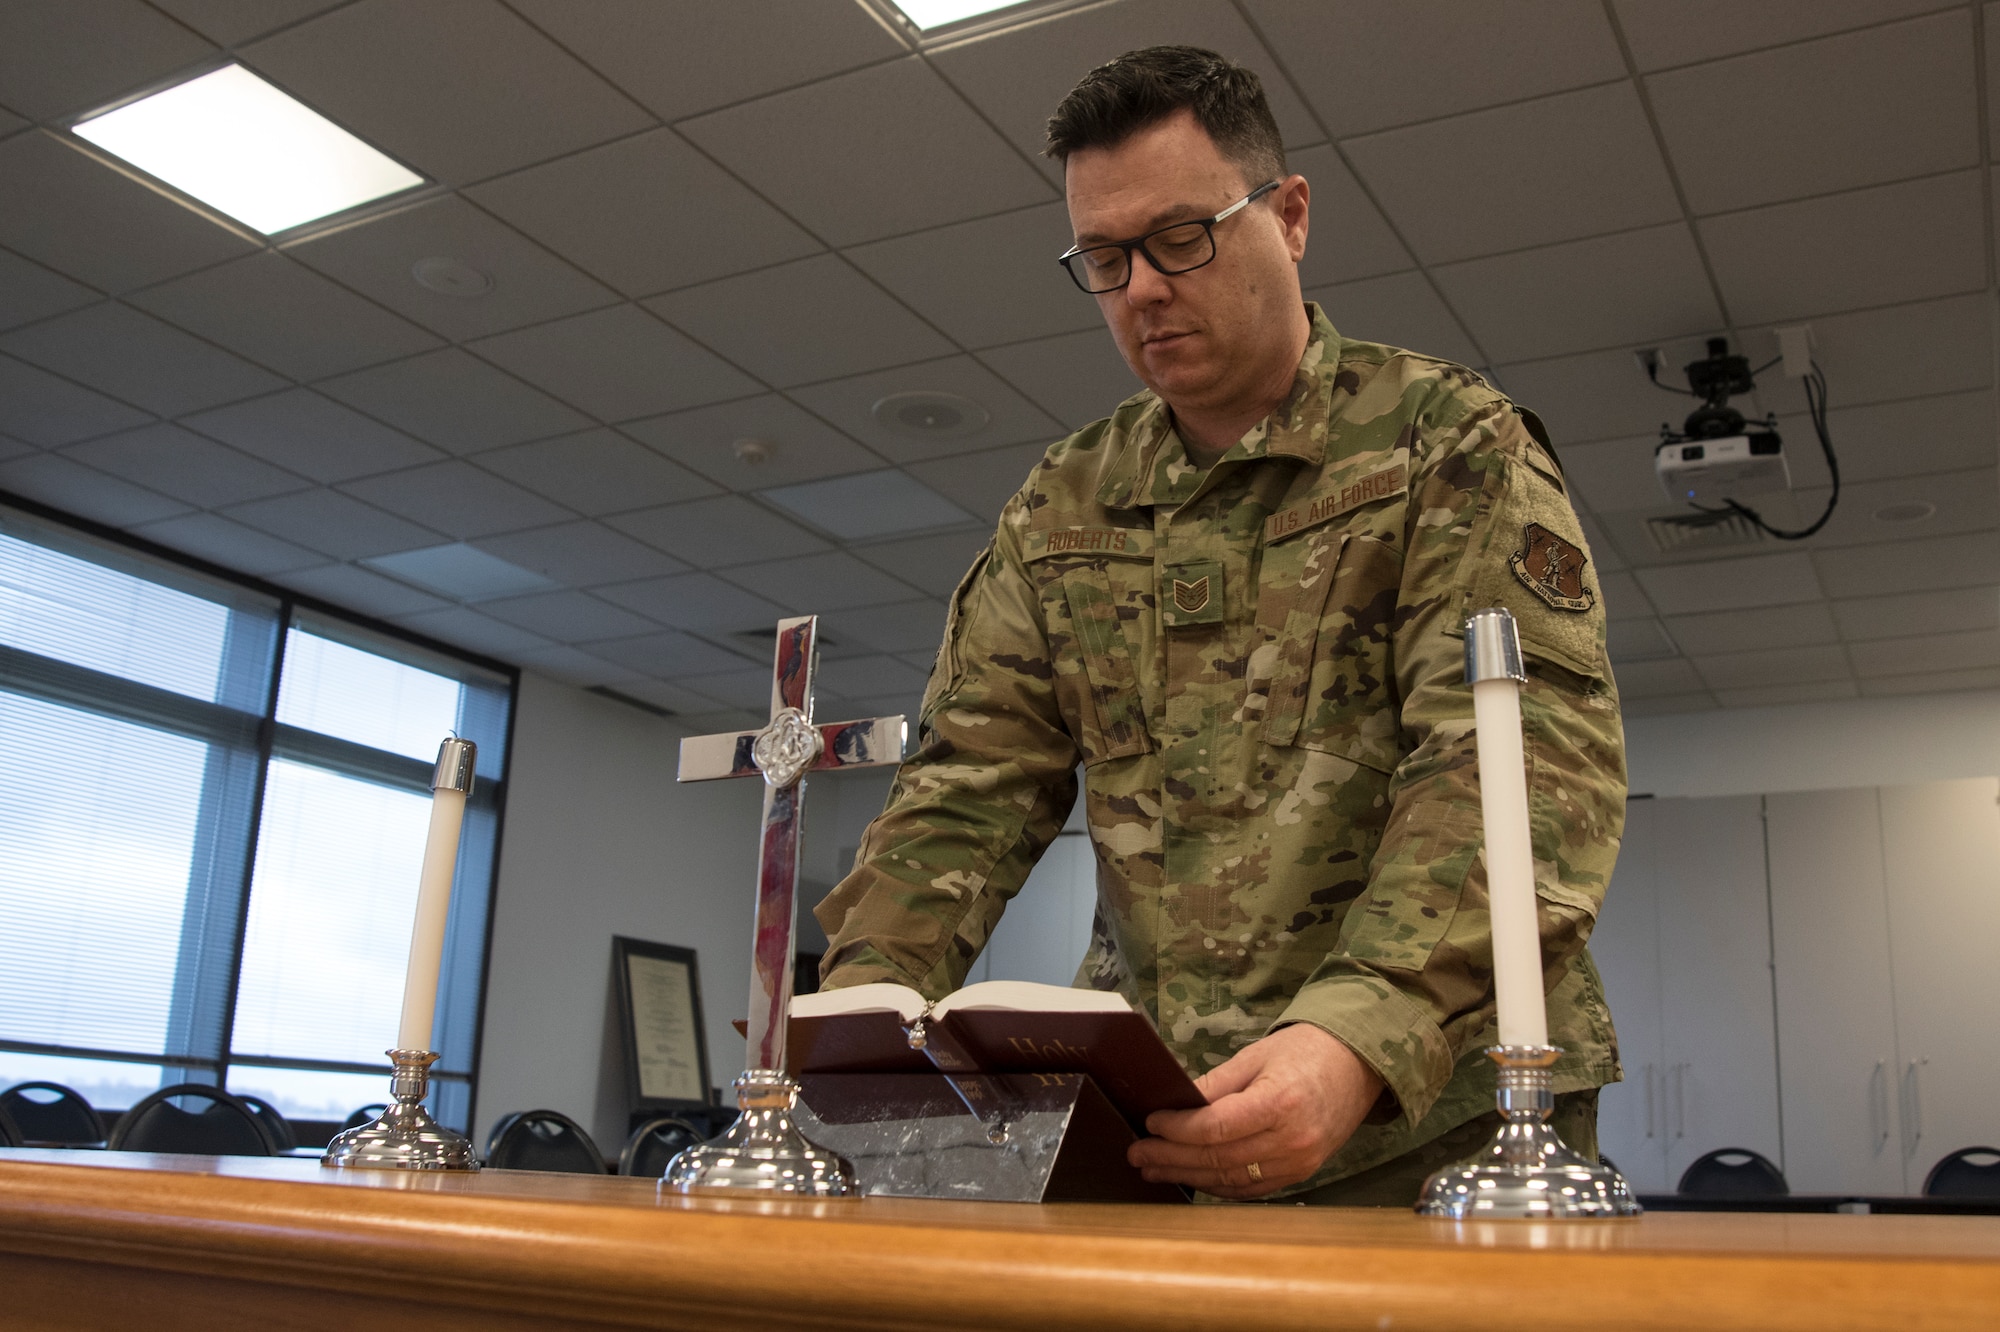 Military member prepares a bible for church service